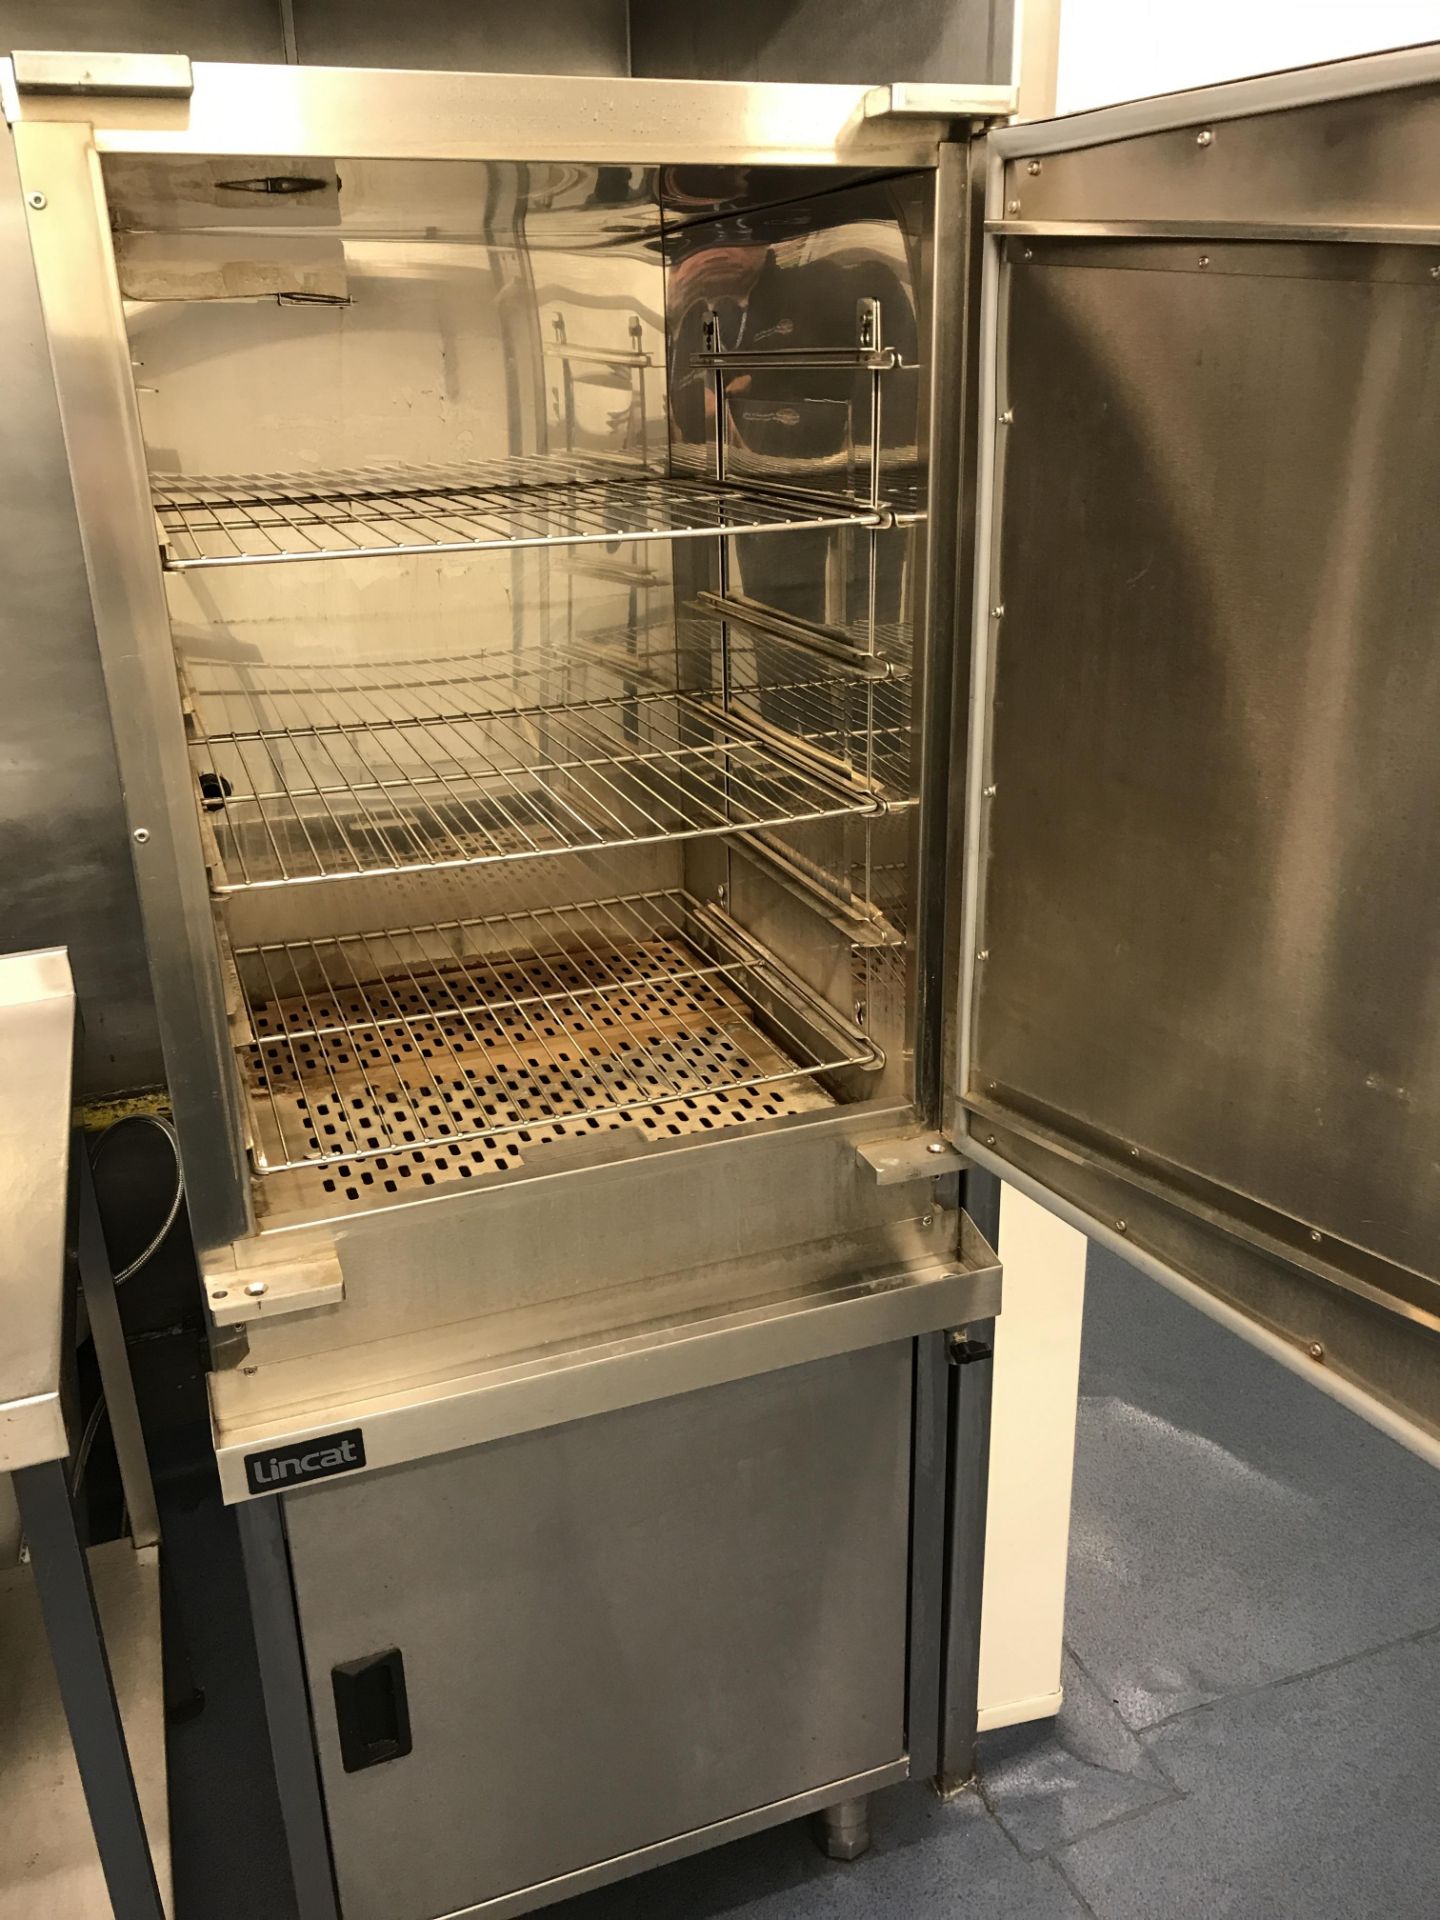 Lincast electric stainless steel atmospheric steamer oven - Image 2 of 4